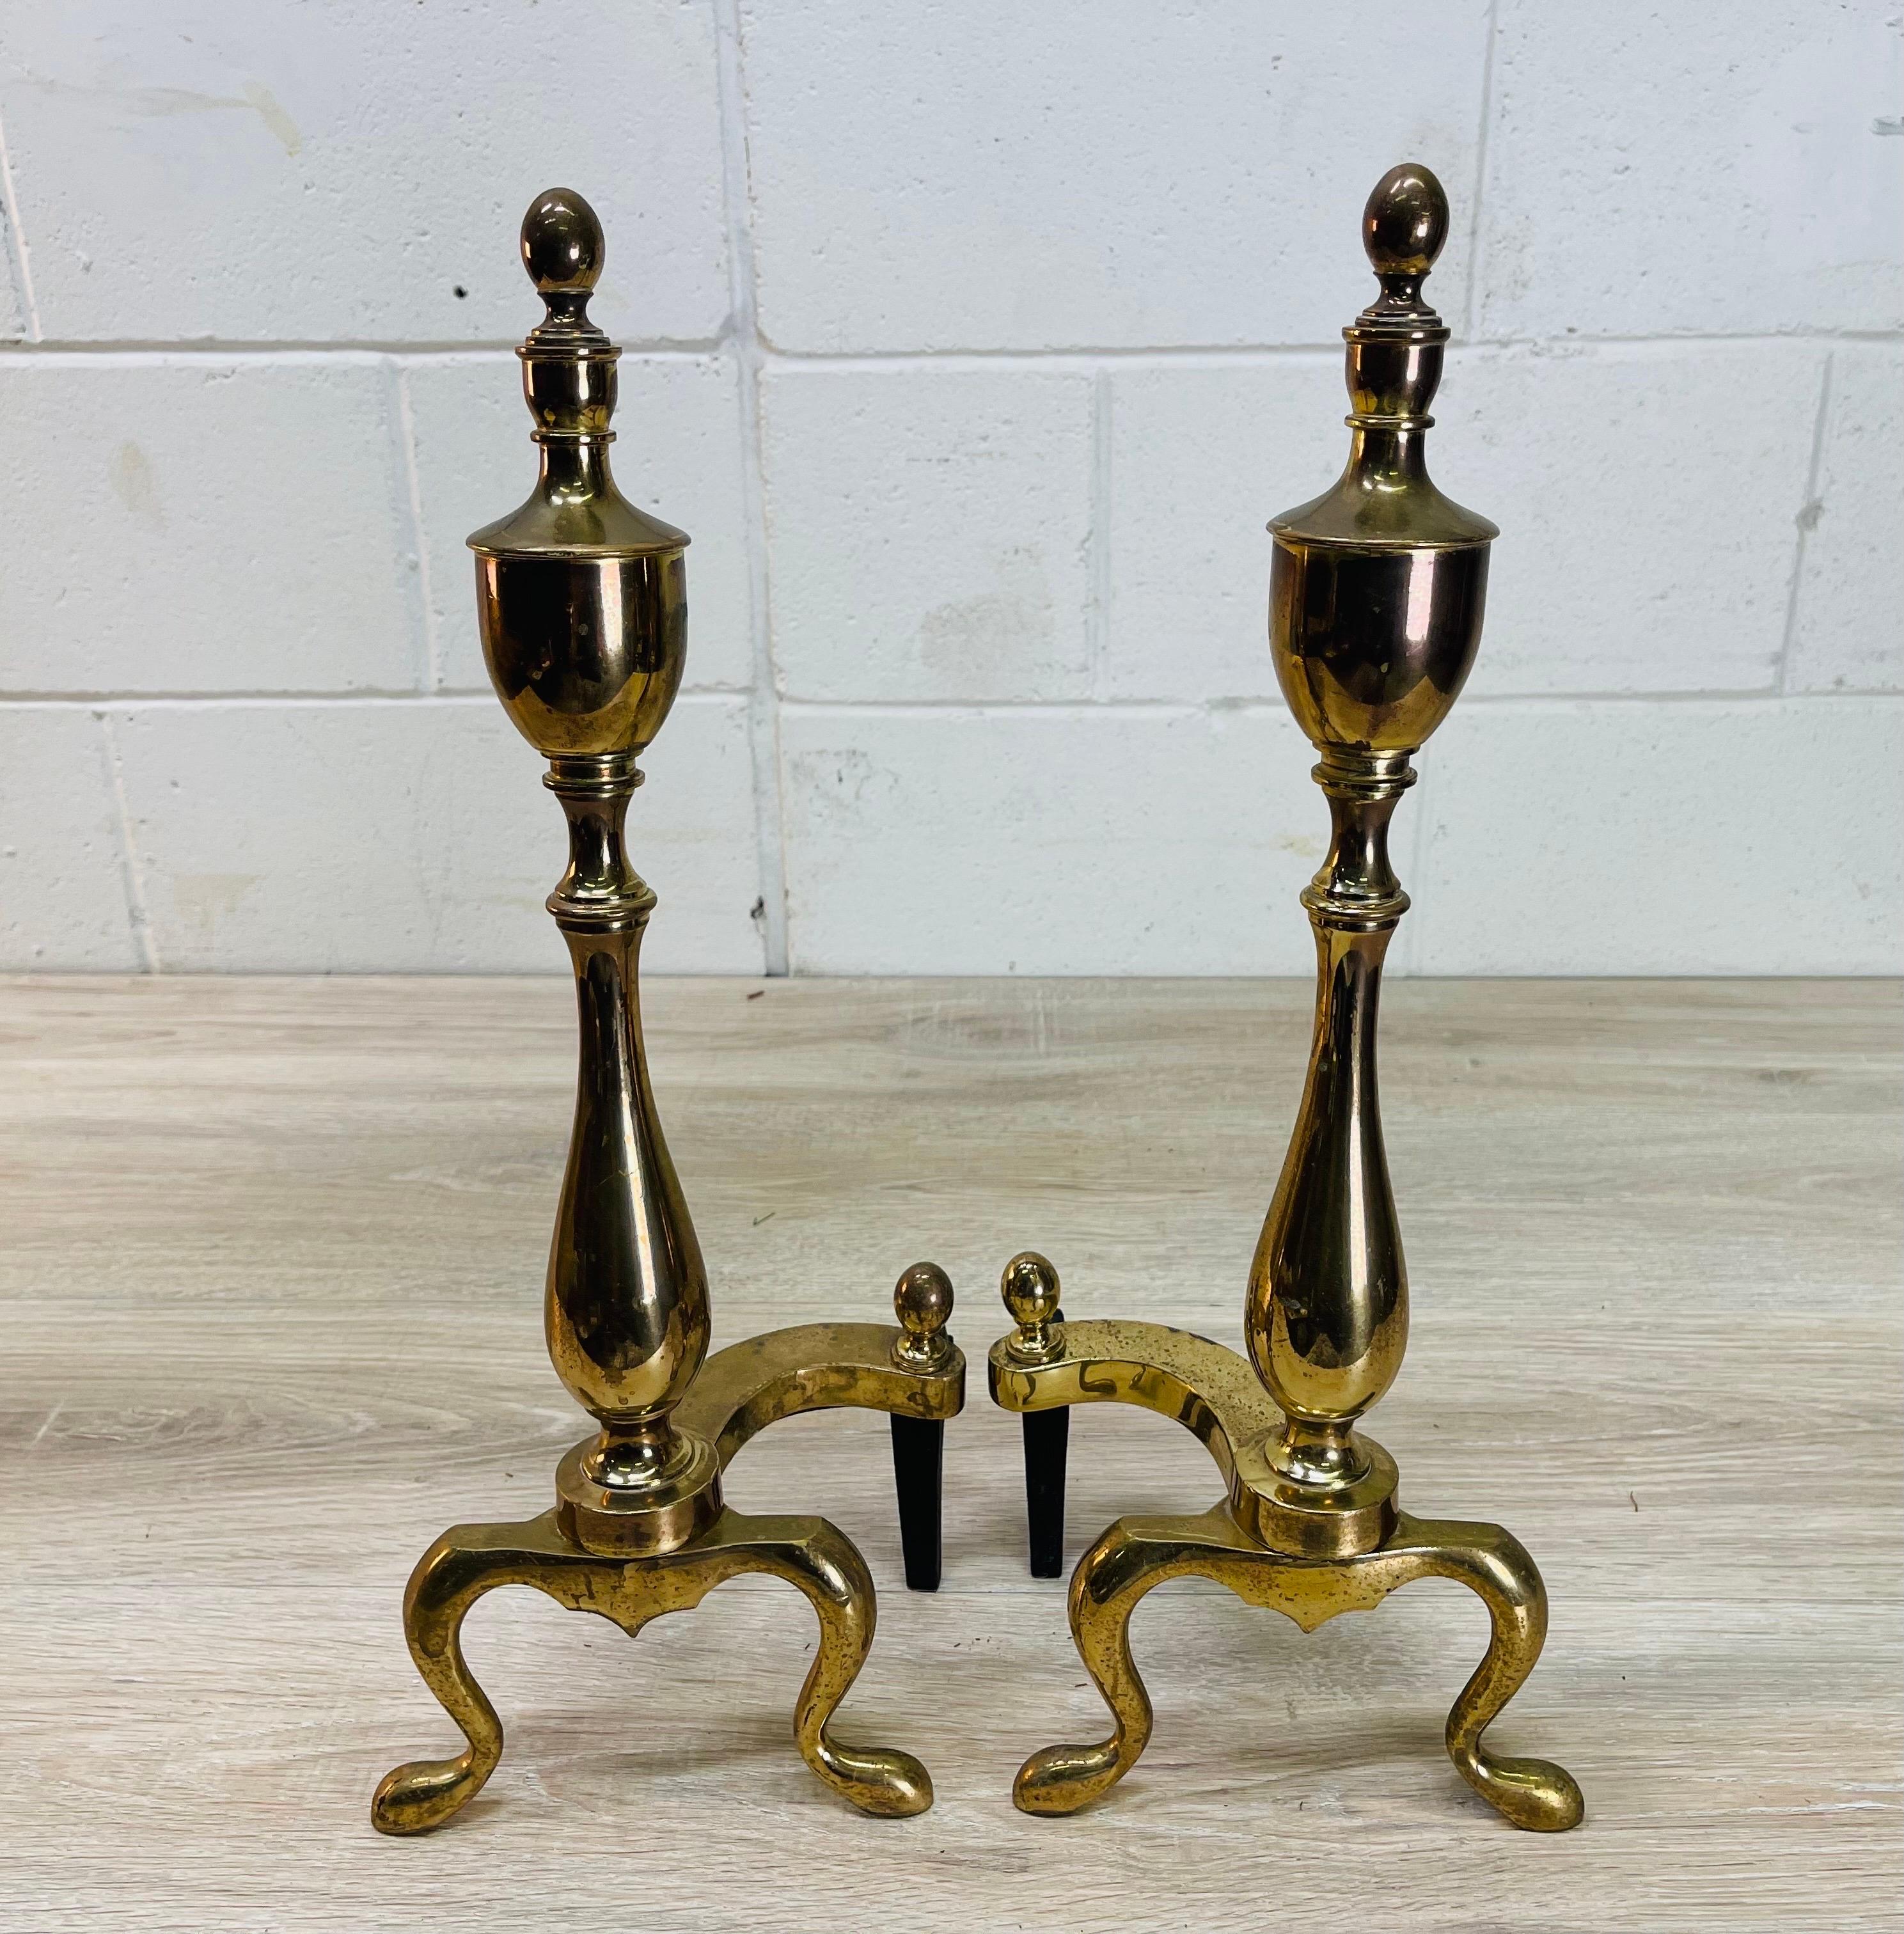 Vintage 1960s pair of brass Federal style andirons. The andirons are for decoration only and do not hold any wood. Light tarnish from age and use. No marks.